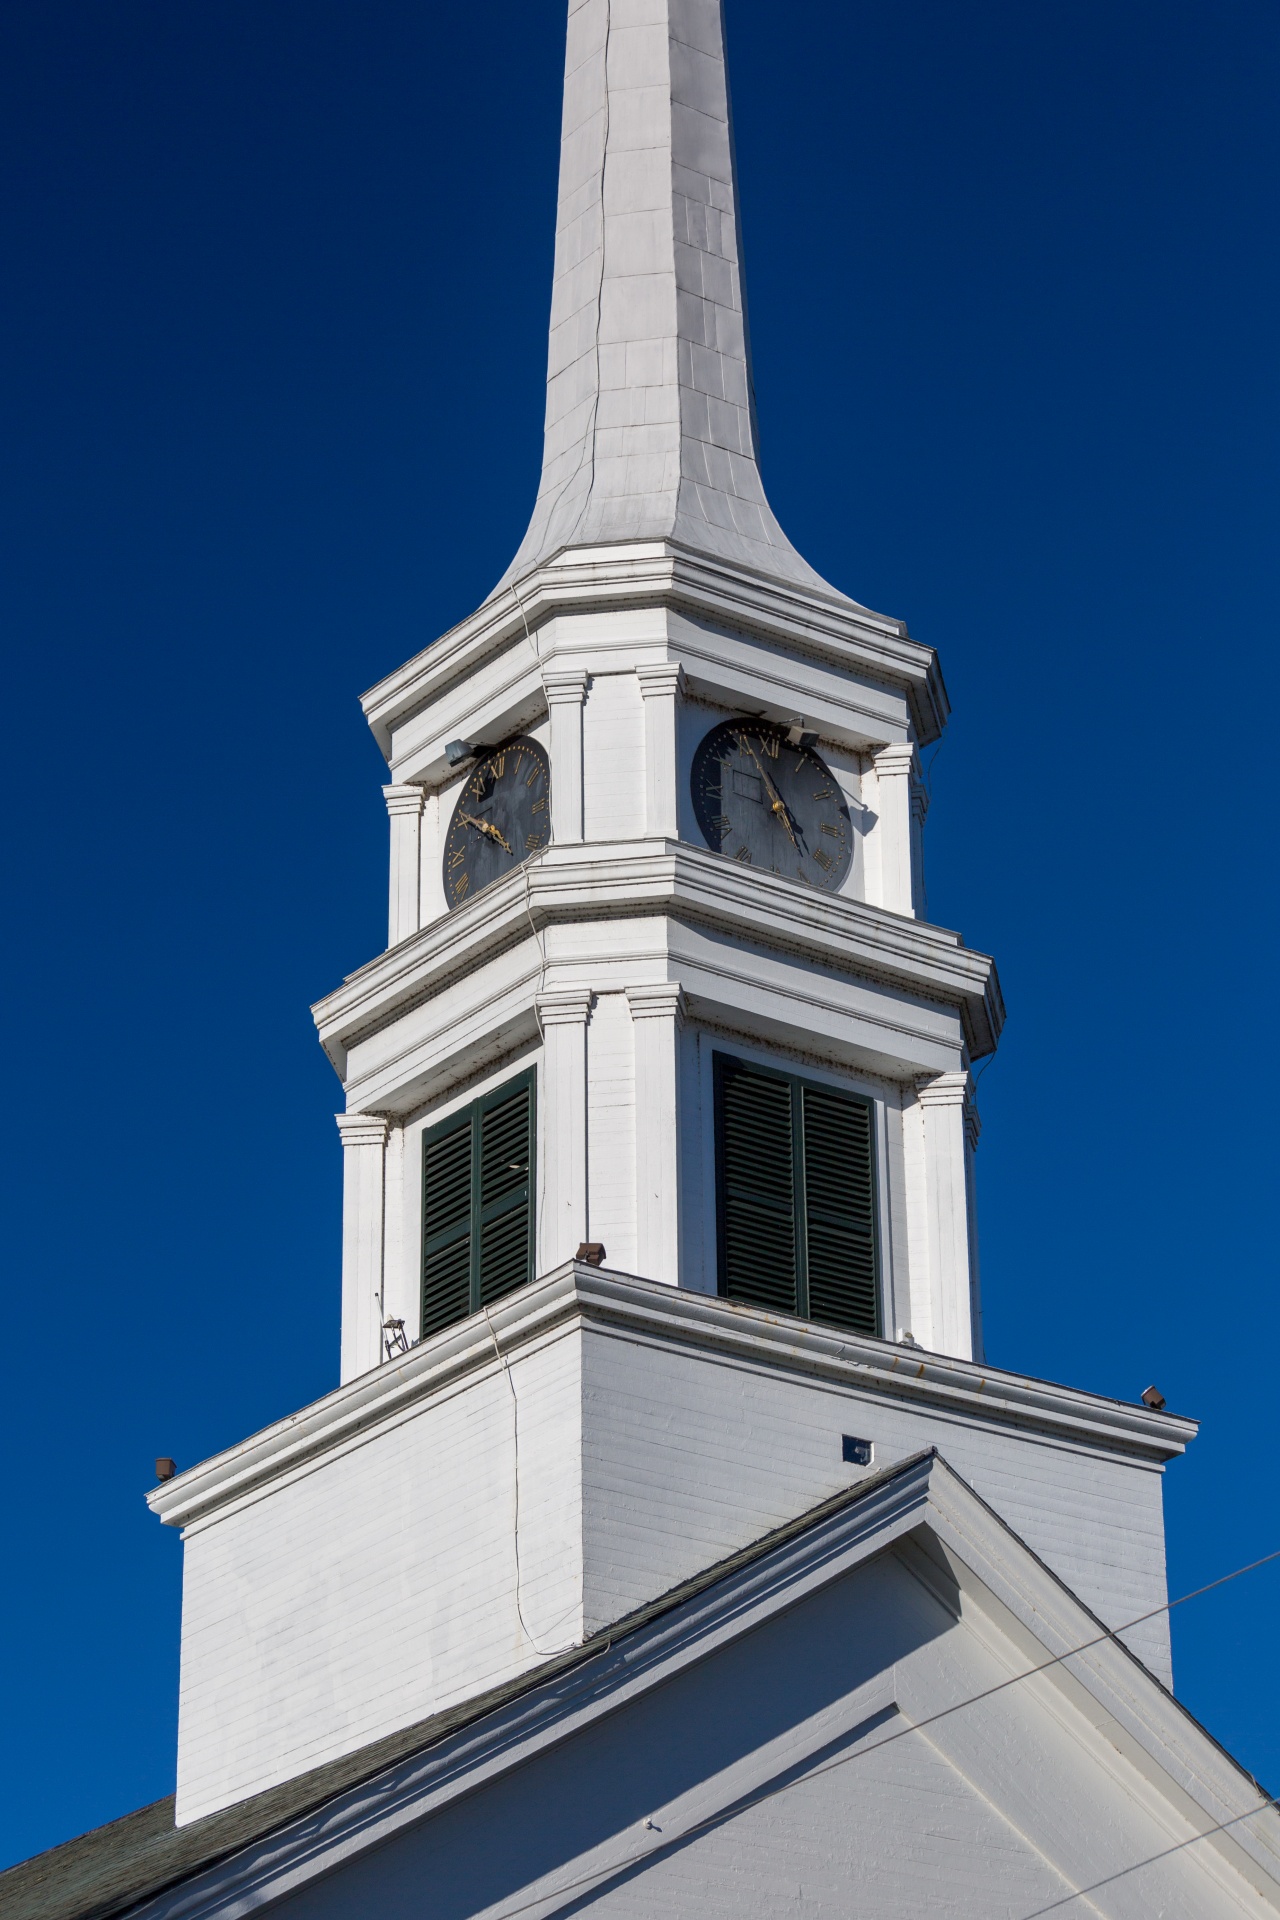 White wooden church in the United States